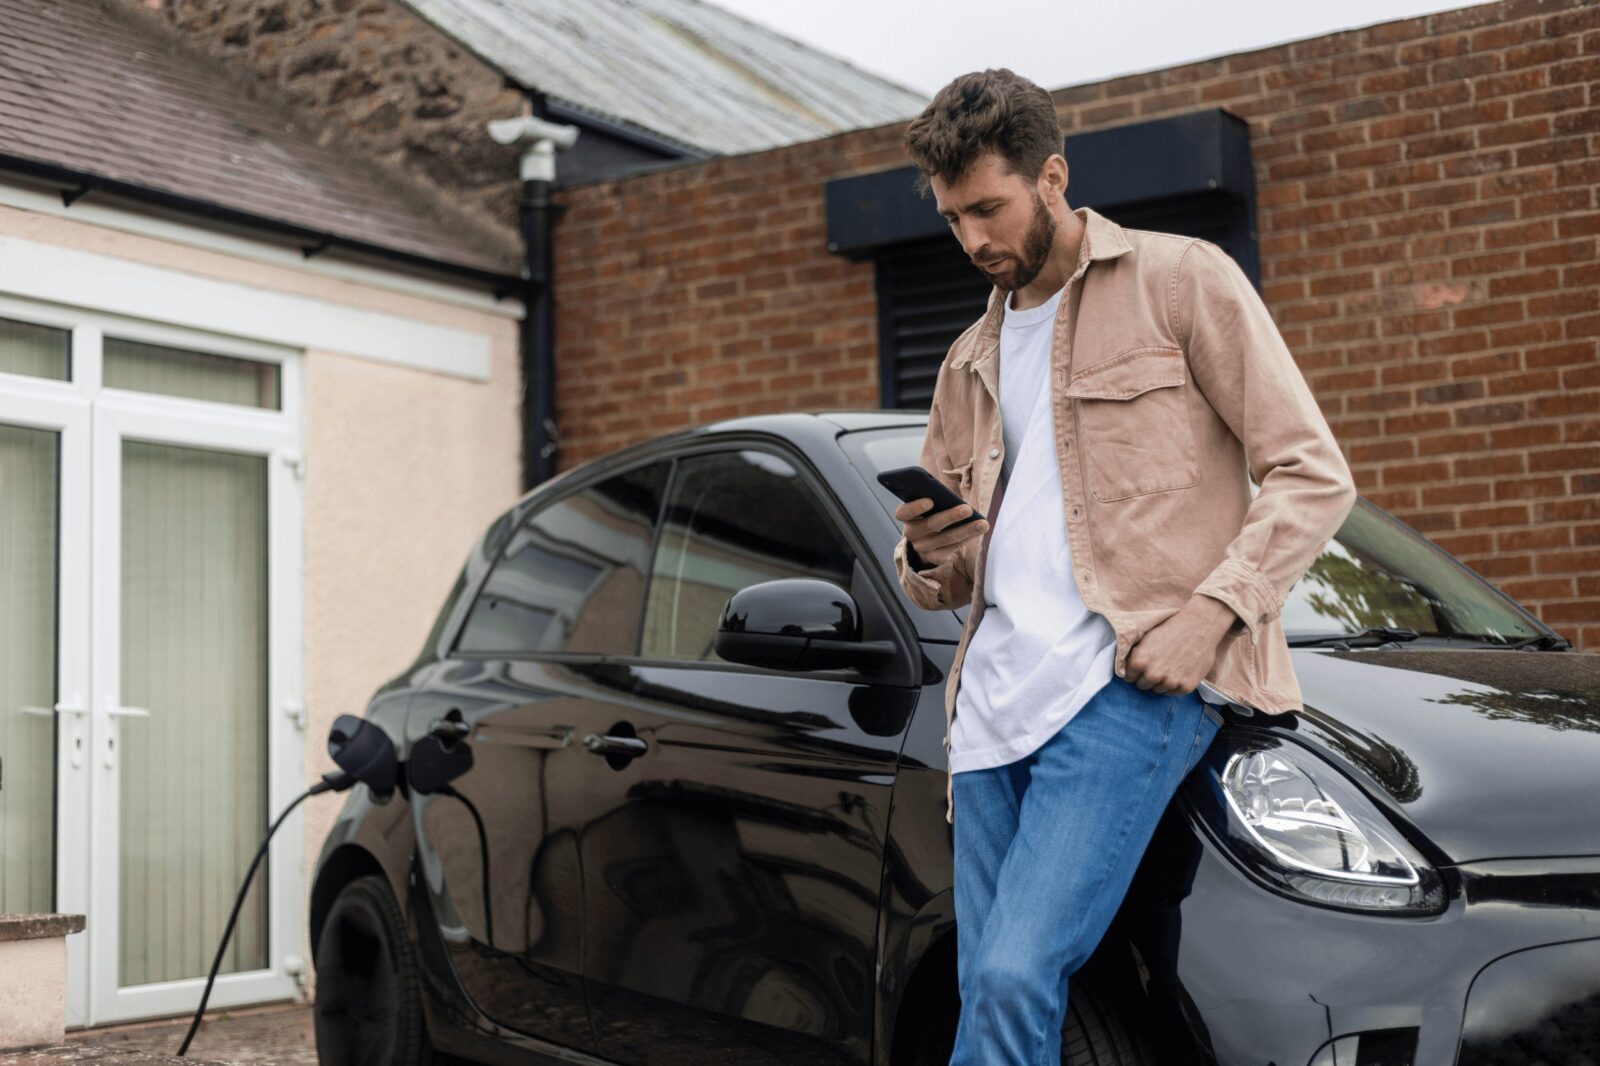 A man leans against his car, looking at his phone as his electric vehicle charges outside.